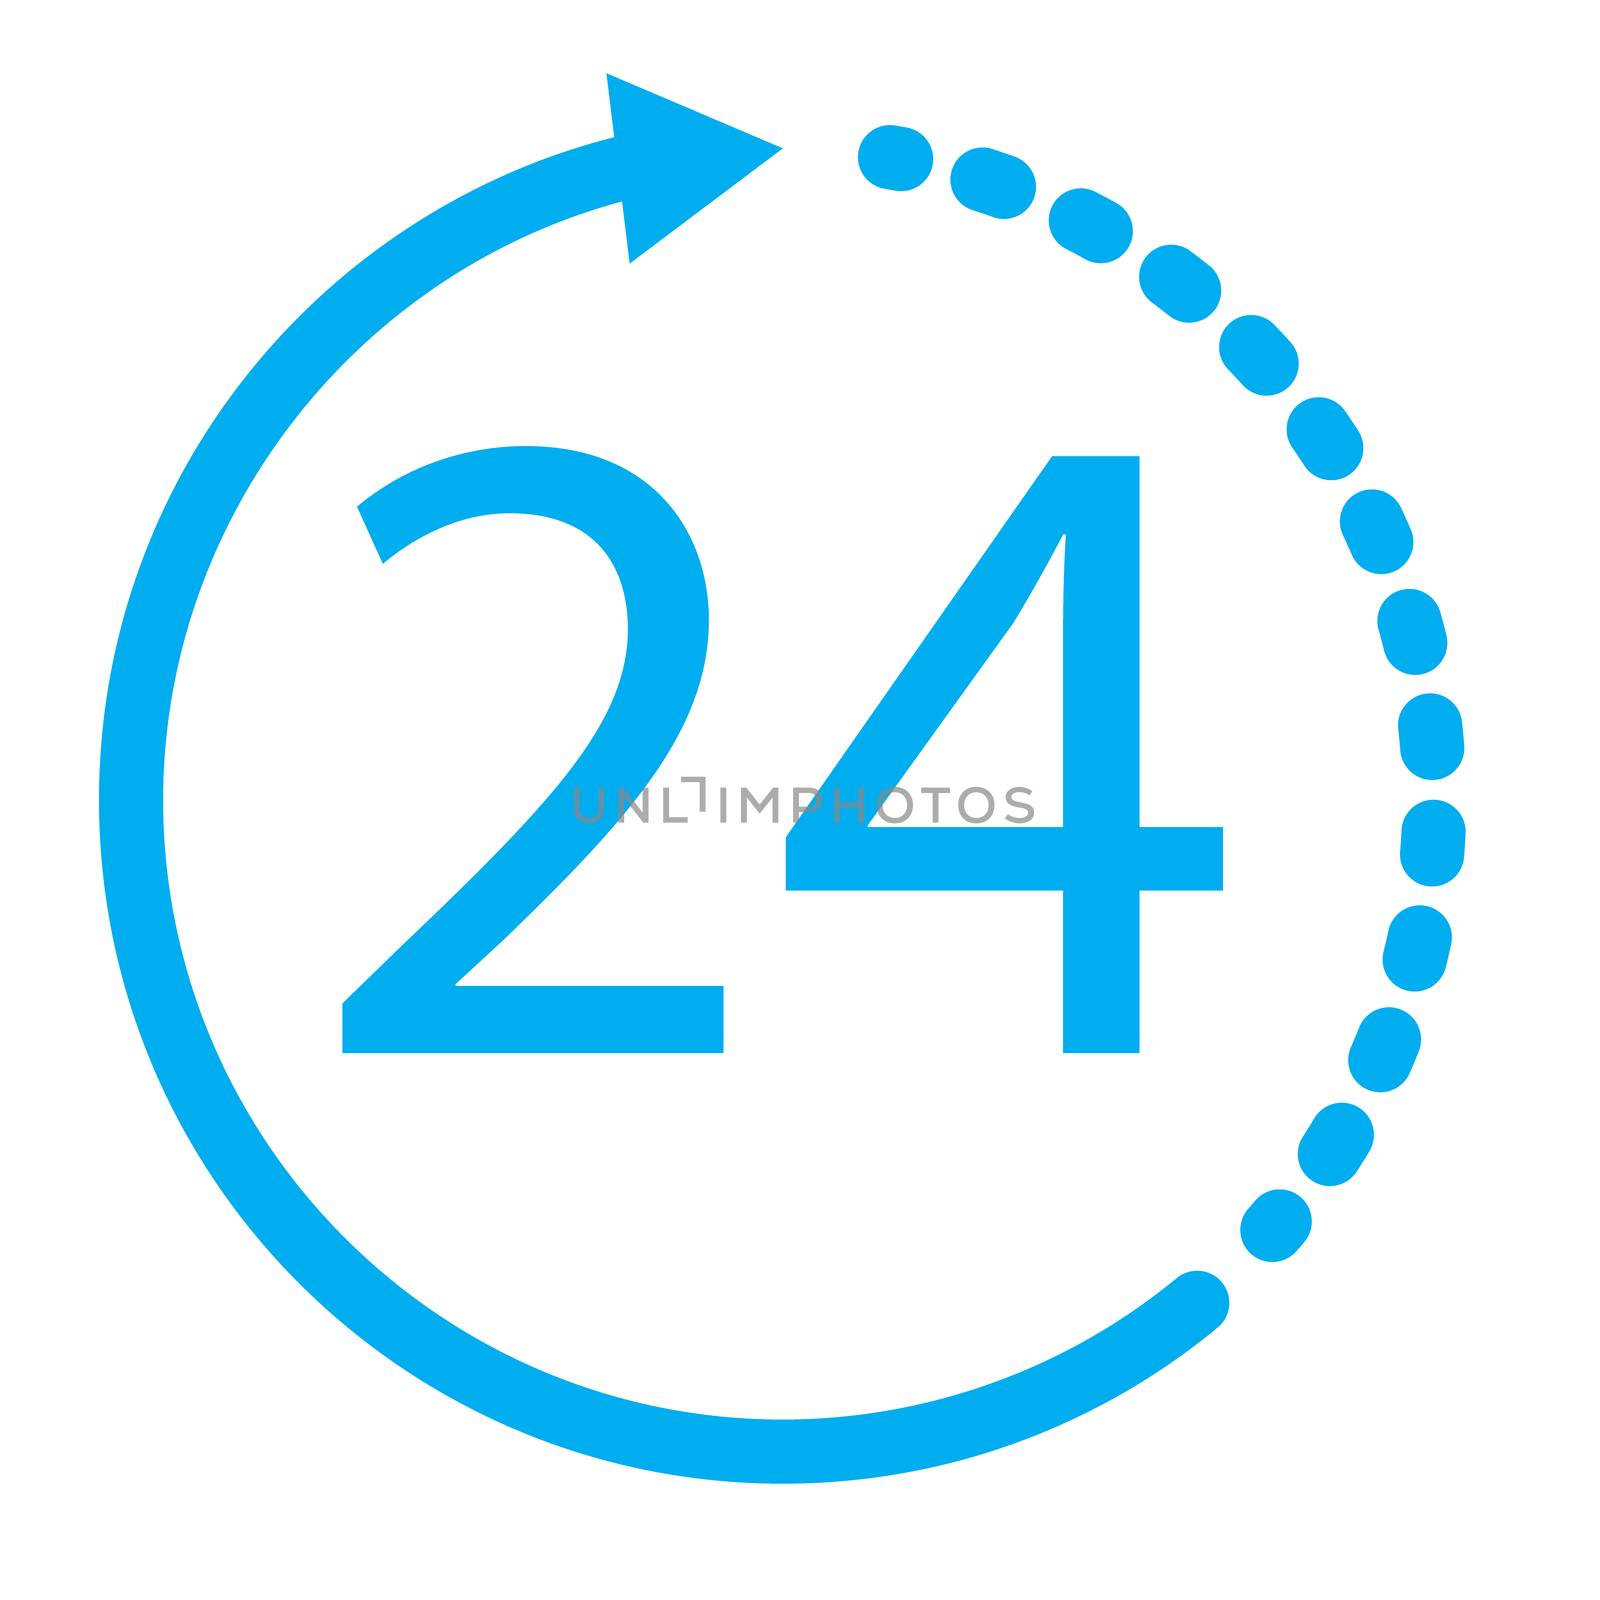 24 hours icon on white background. 24 hours sign. flat style design.